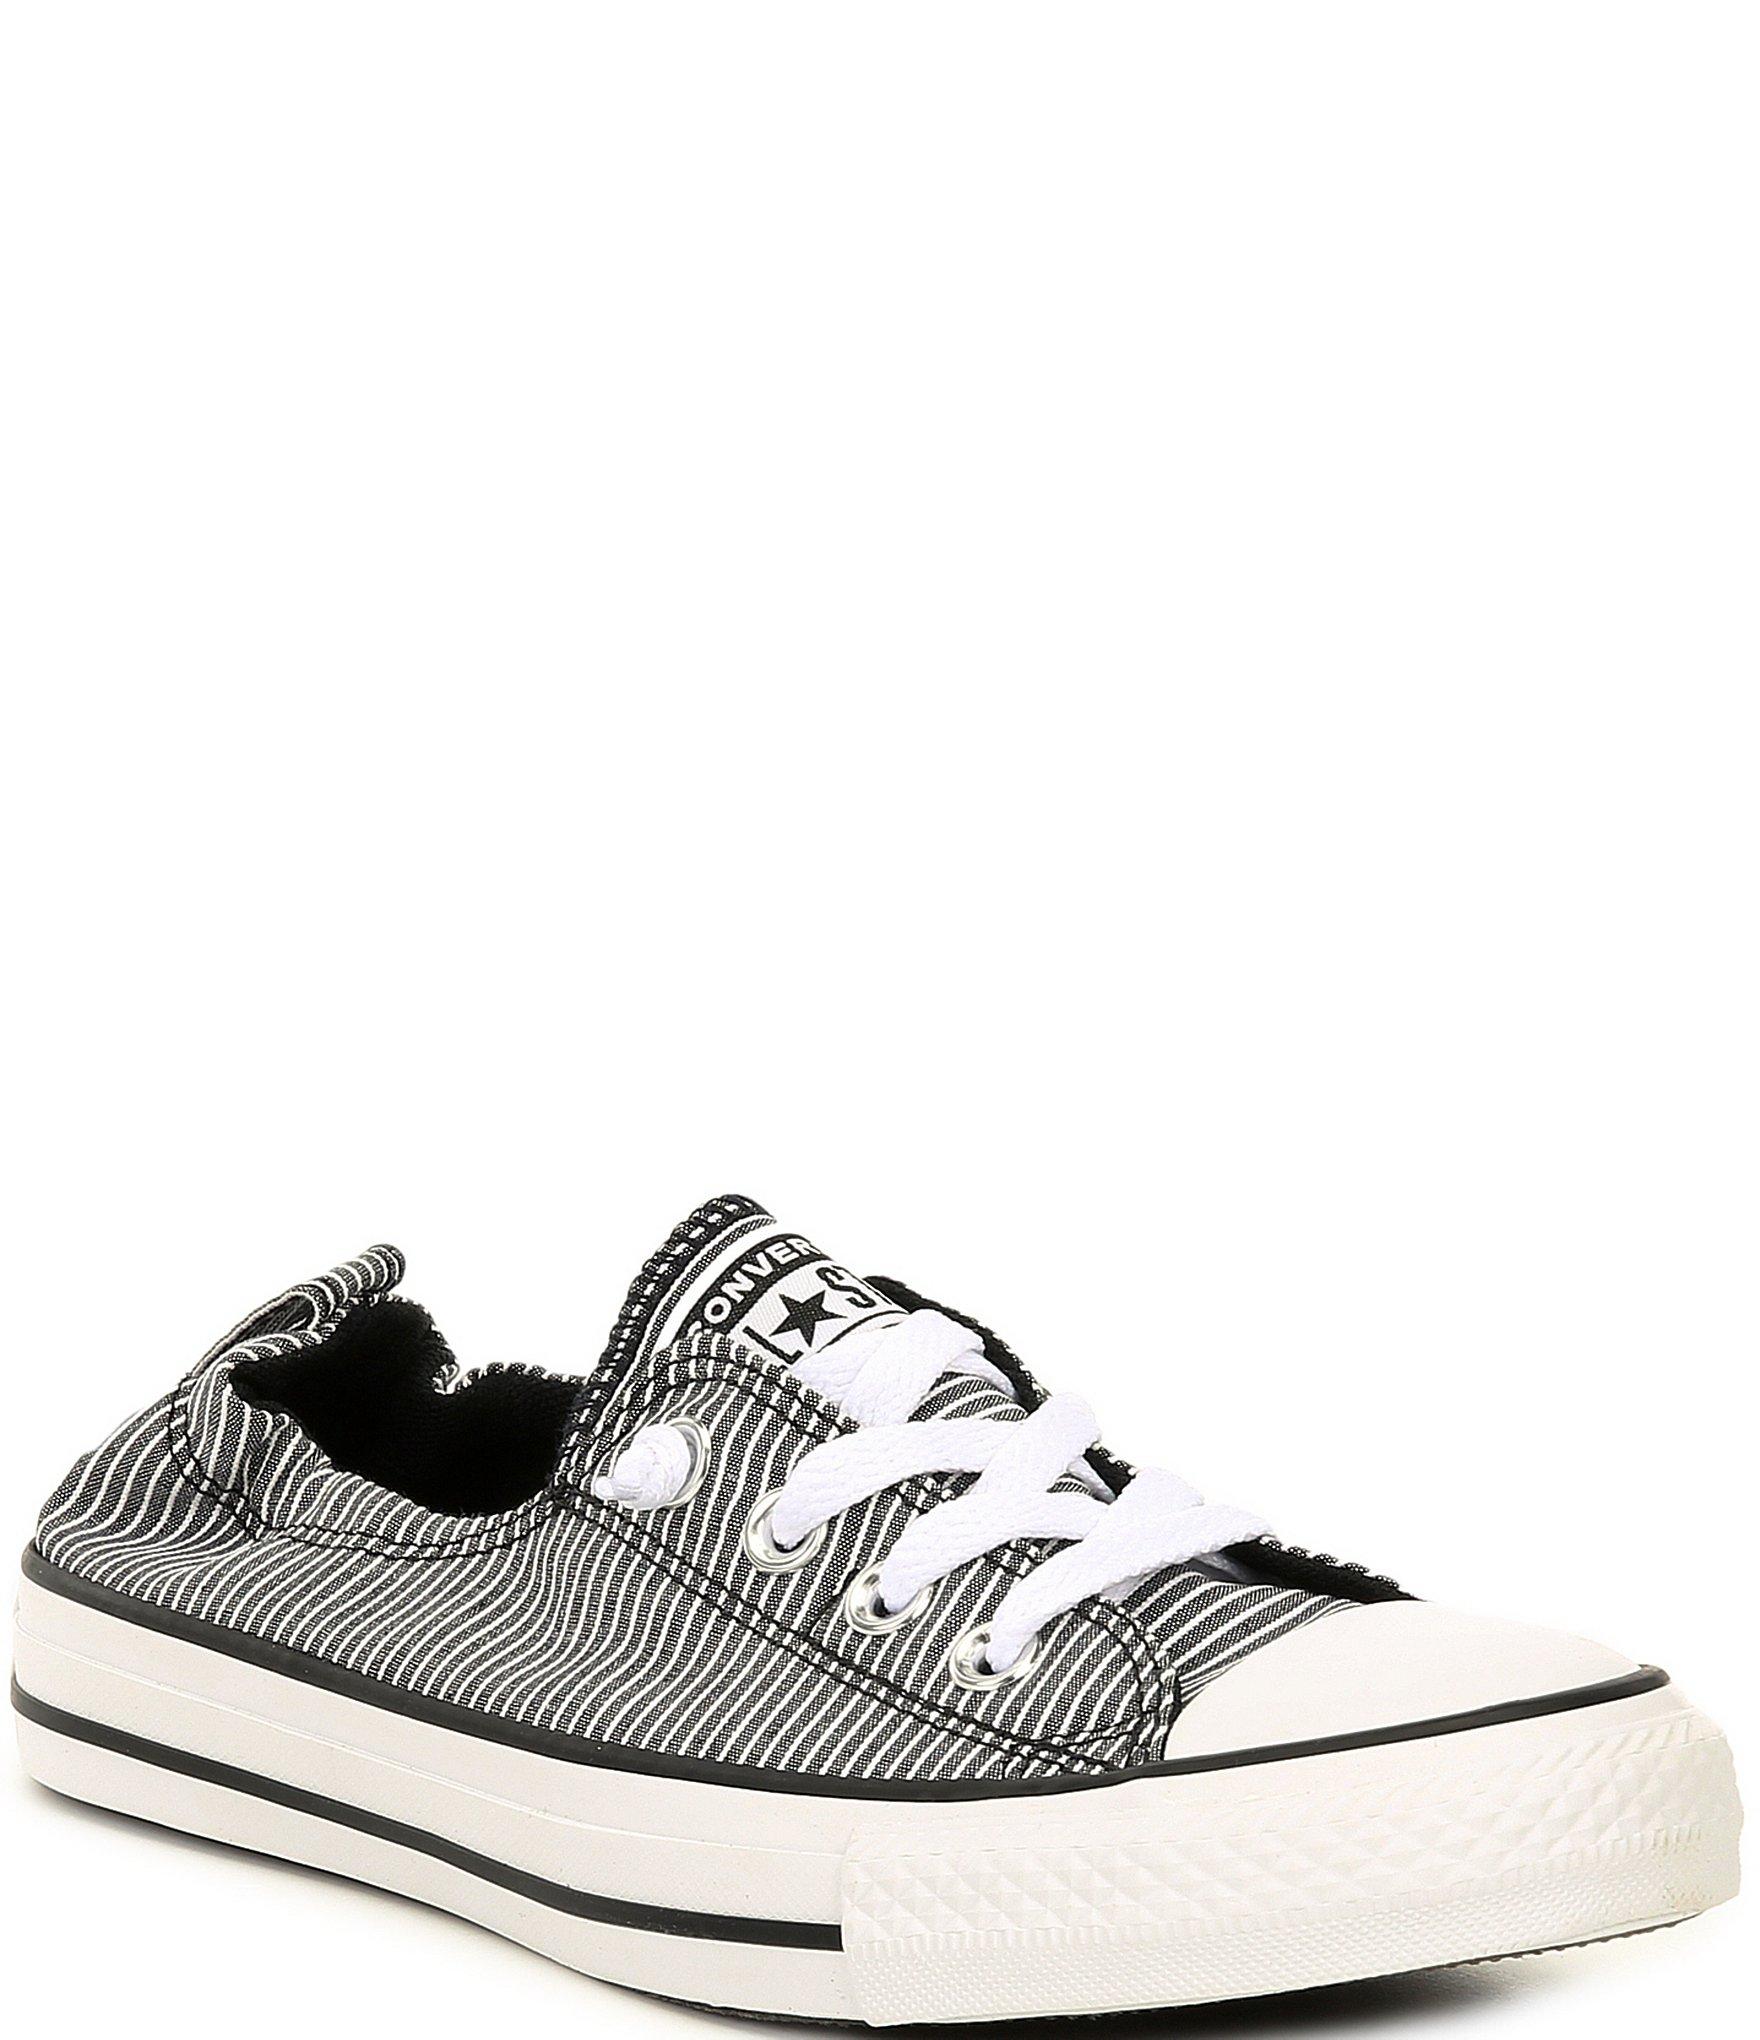 women's converse chuck taylor all star chambray striped shoreline sneakers